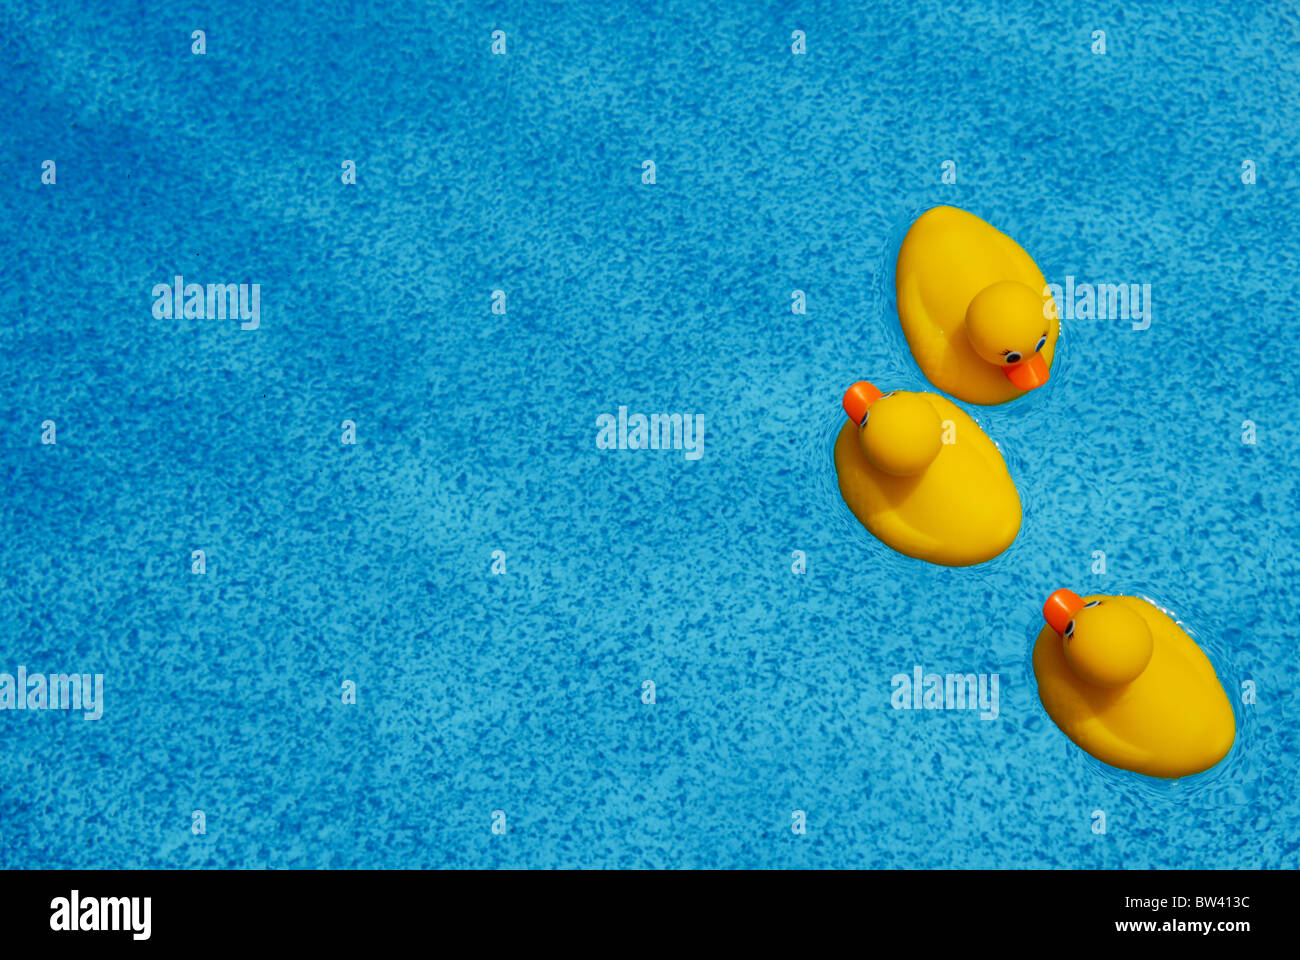 Three rubber duckies float on the aquamarine blue water in a swimming pool. Stock Photo